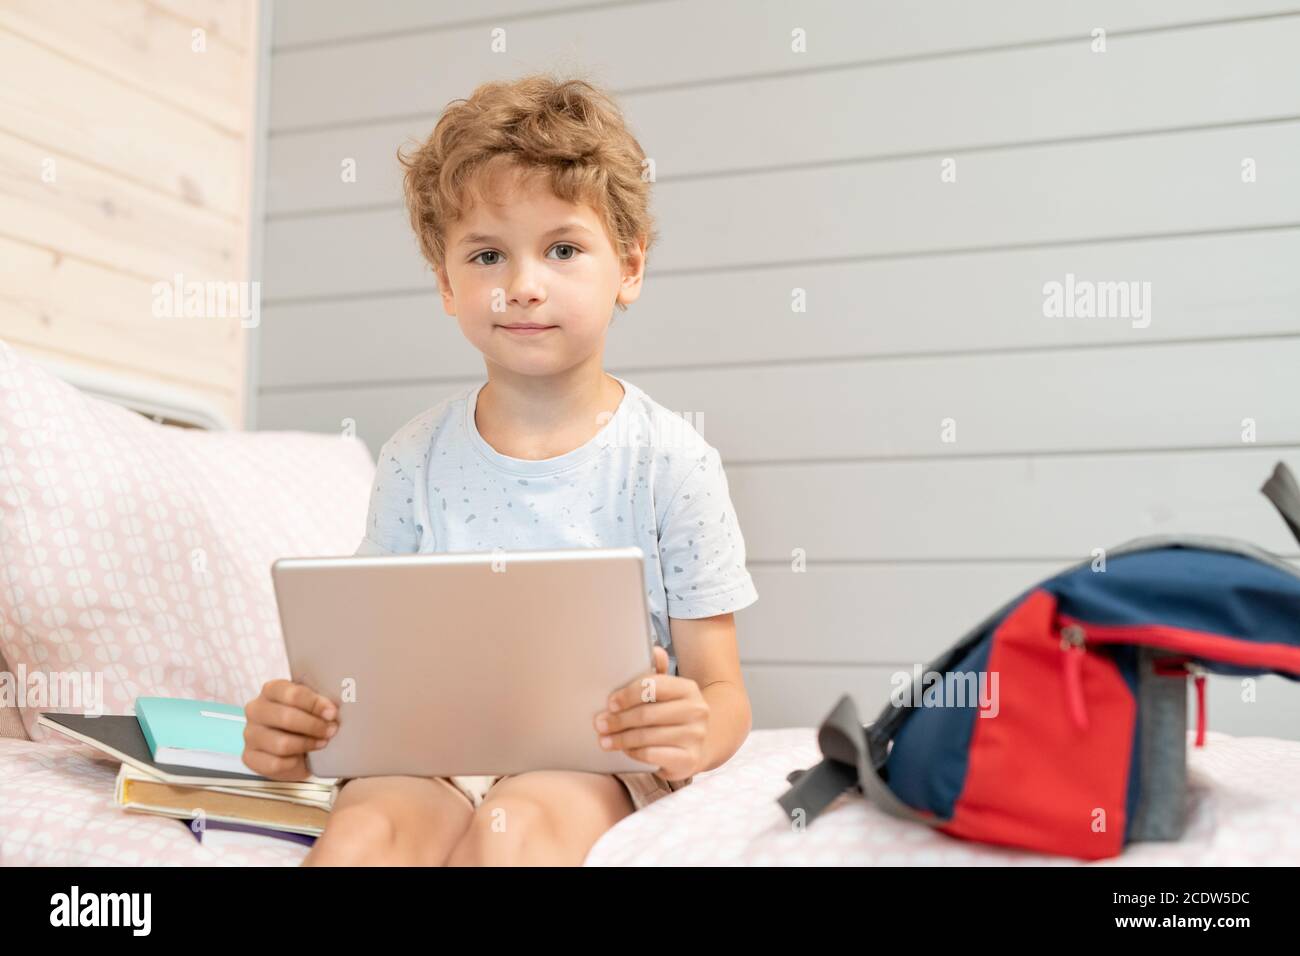 Adorable blond schoolboy with digital tablet sitting on bed after school Stock Photo